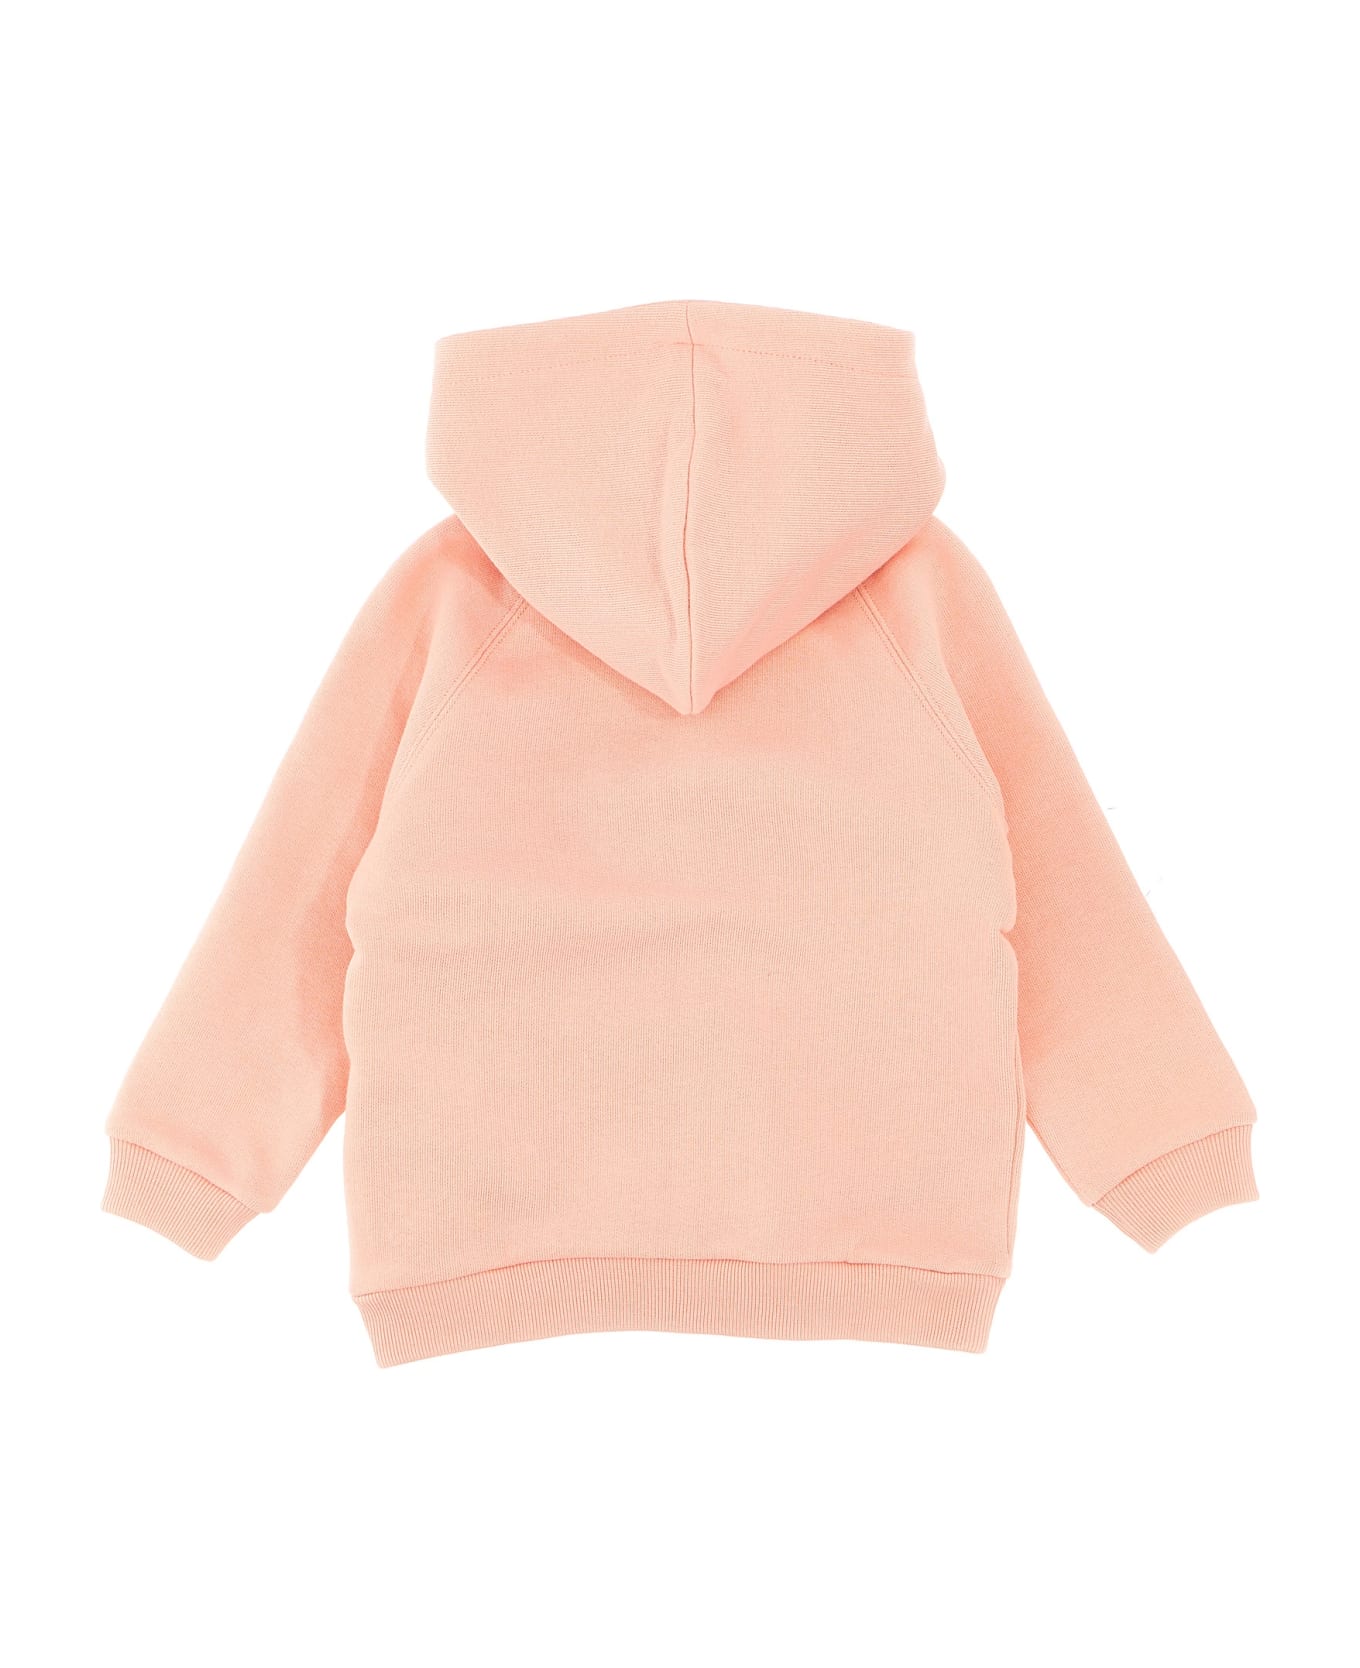 Gucci Logo Embroidery Hoodie - Pink